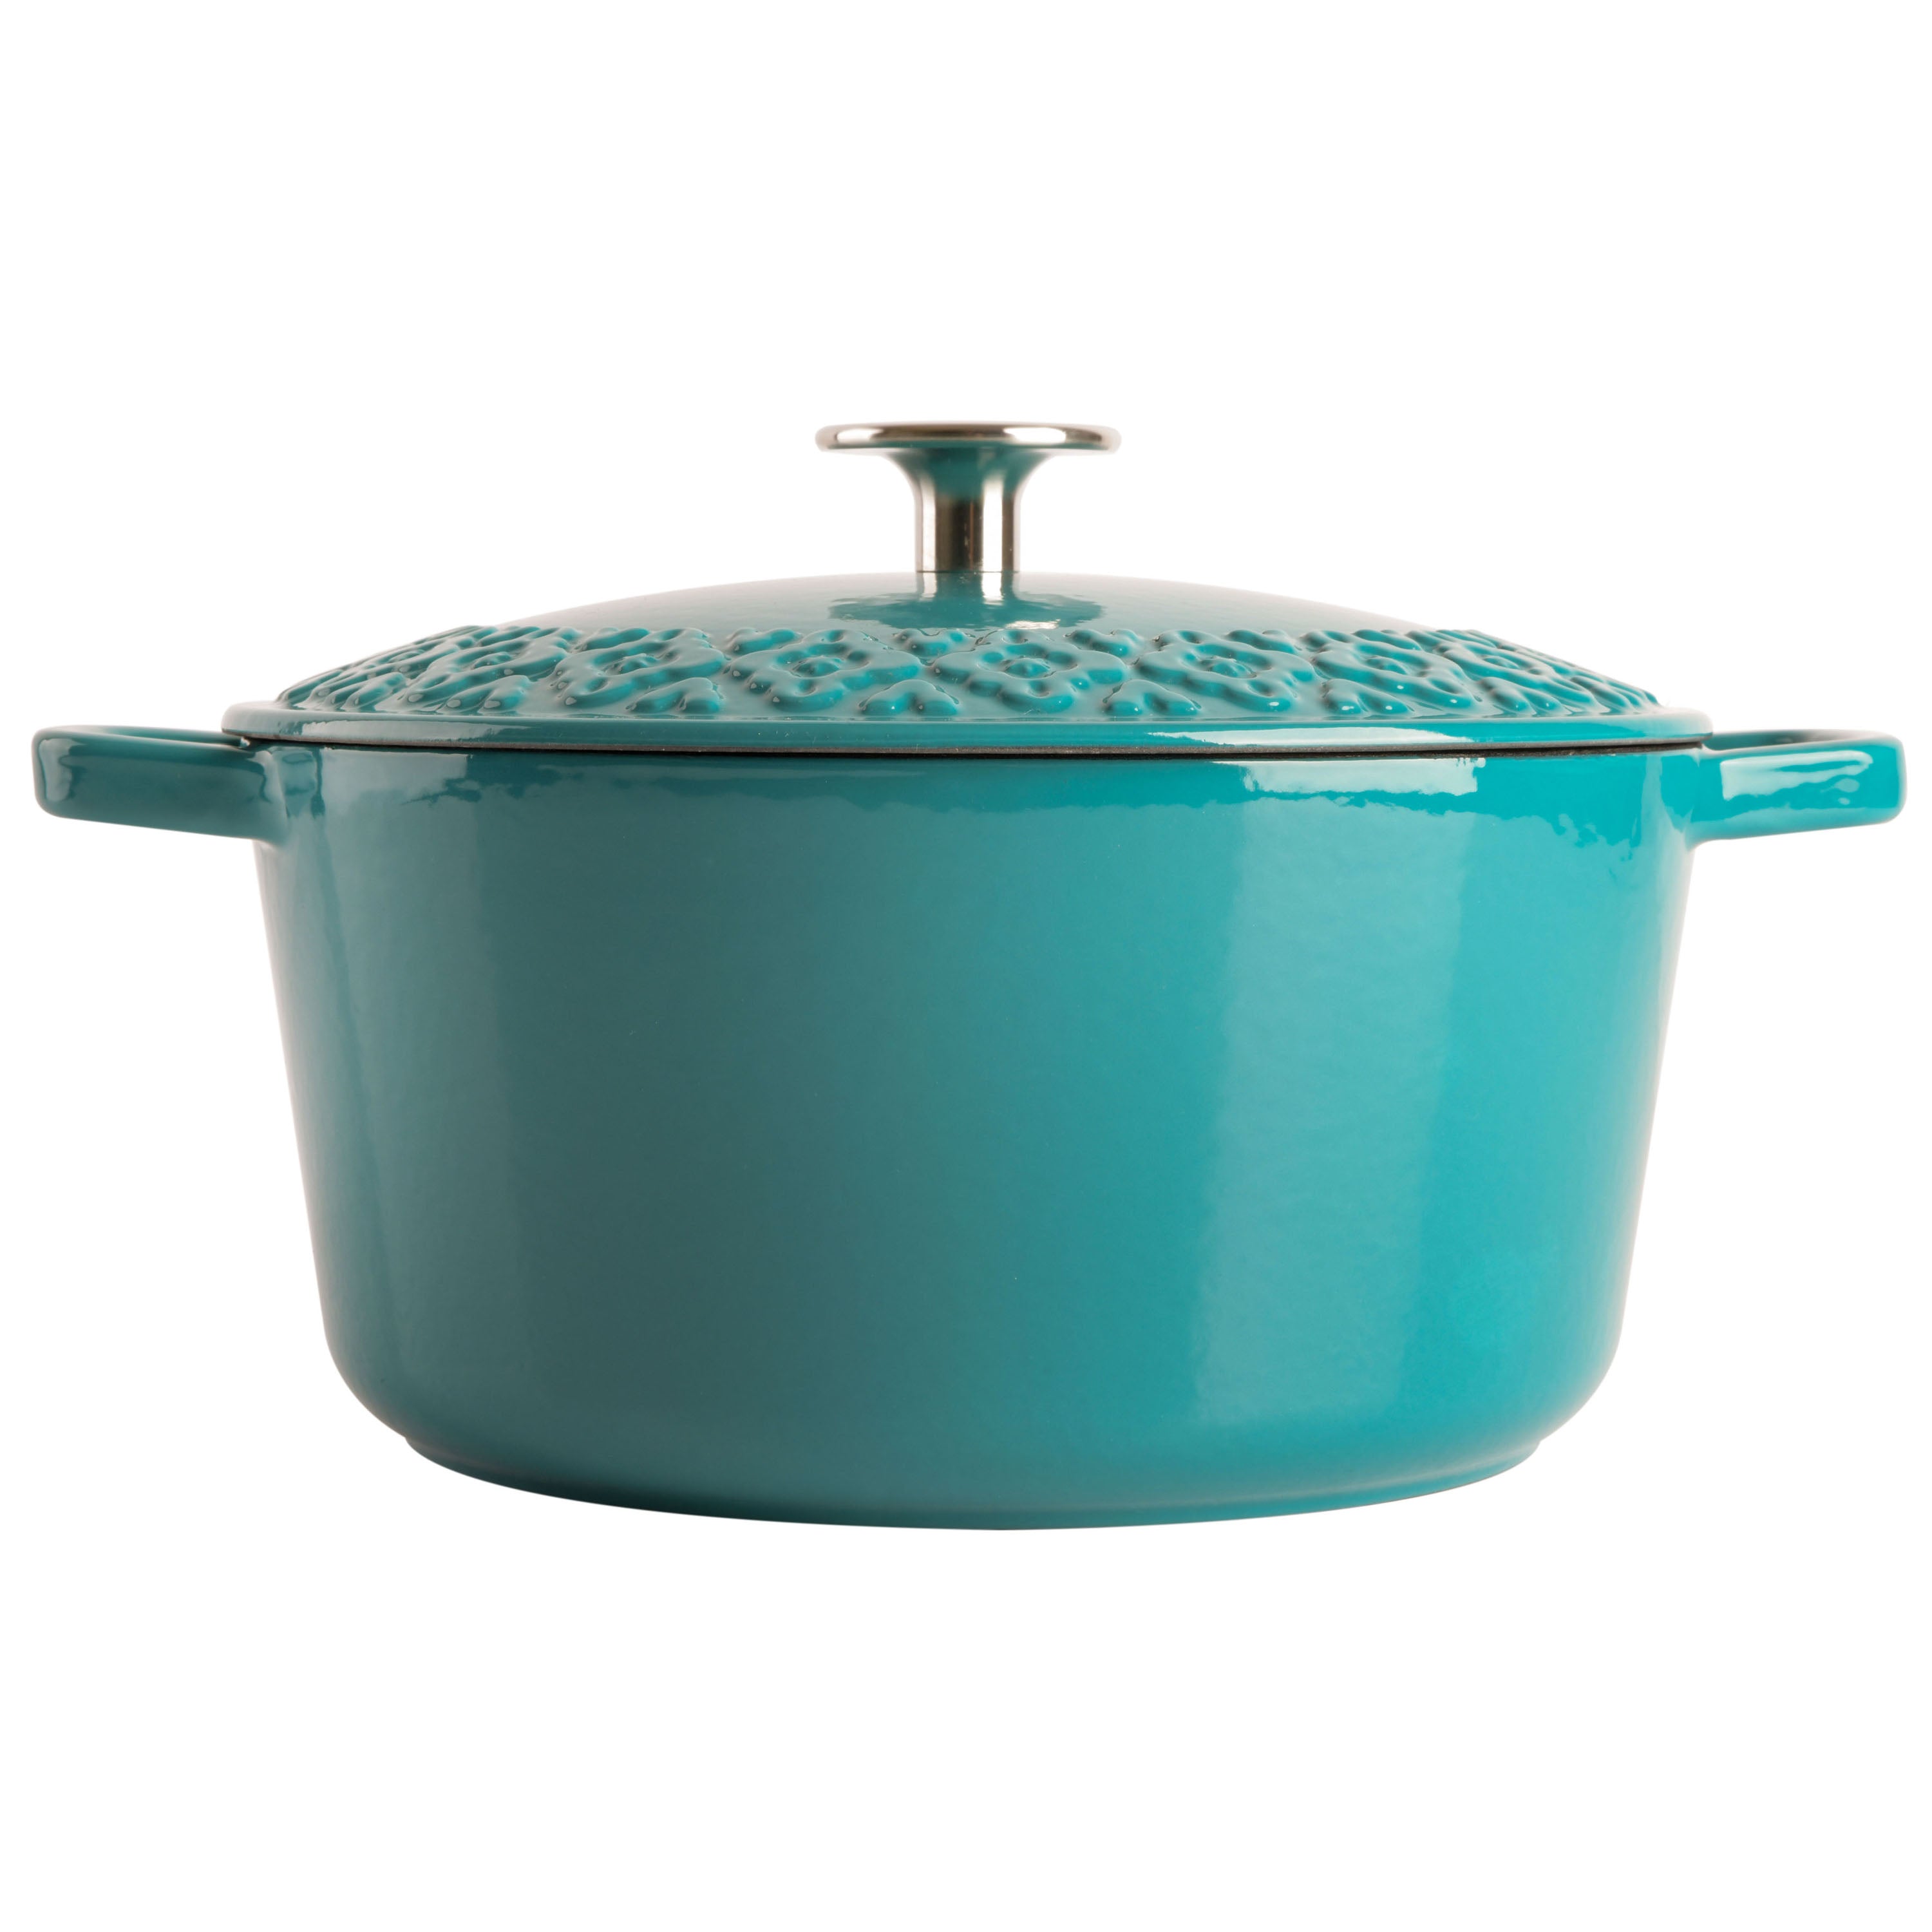 Spice by Tia Mowry Savory Saffron Enameled Cast Iron Cookware Review -  Consumer Reports